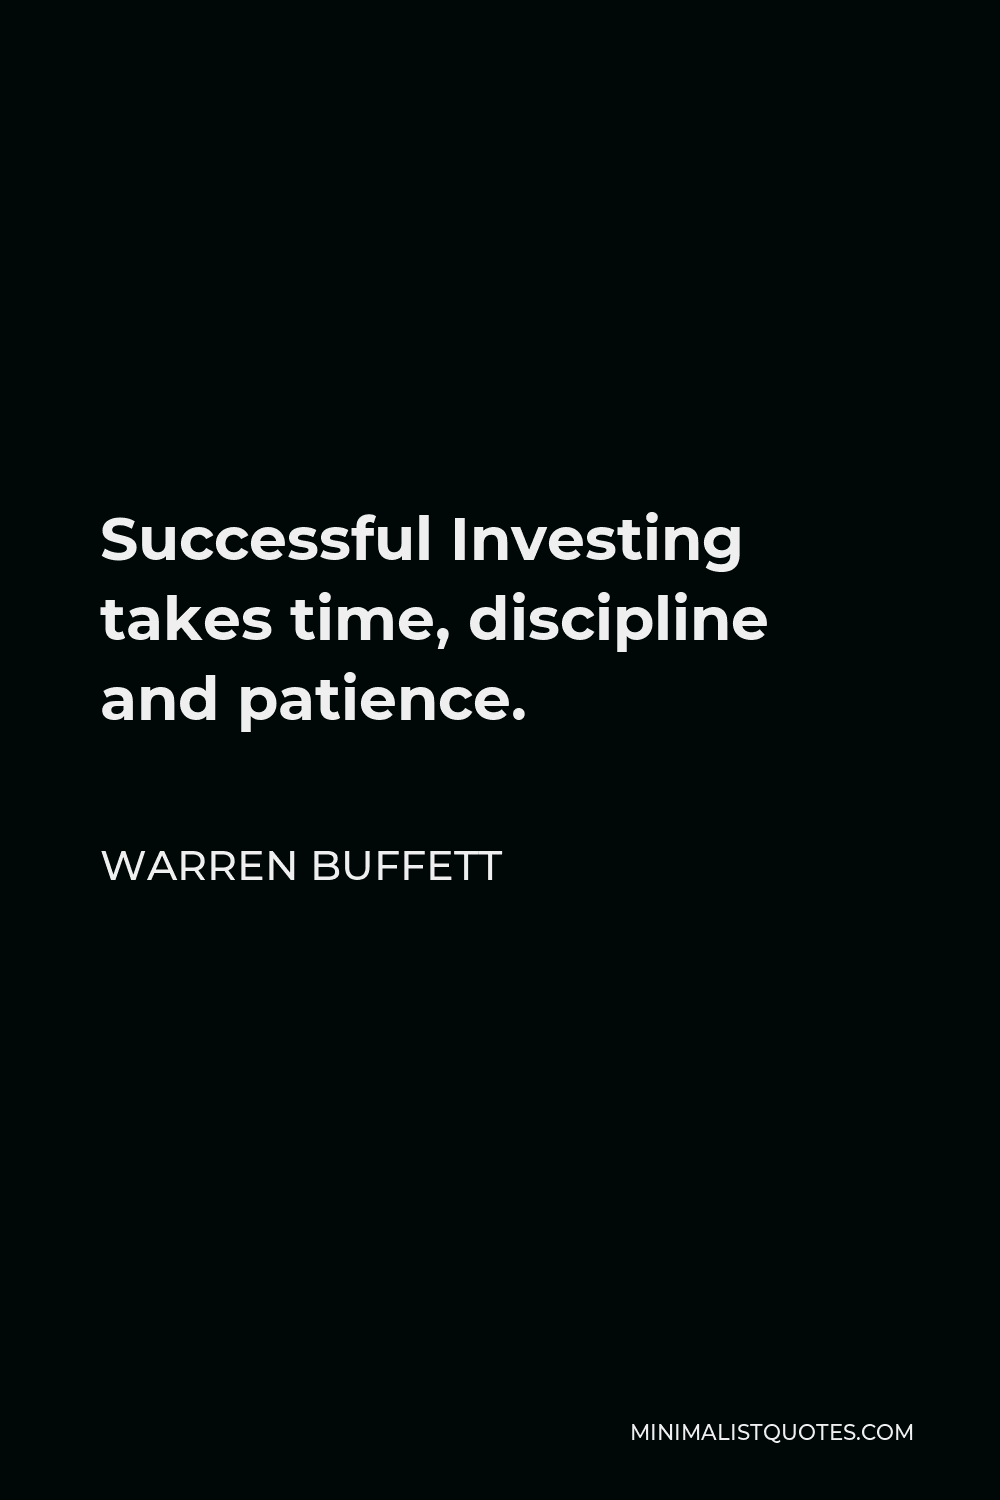 Warren Buffett Quote - Successful Investing takes time, discipline and patience.